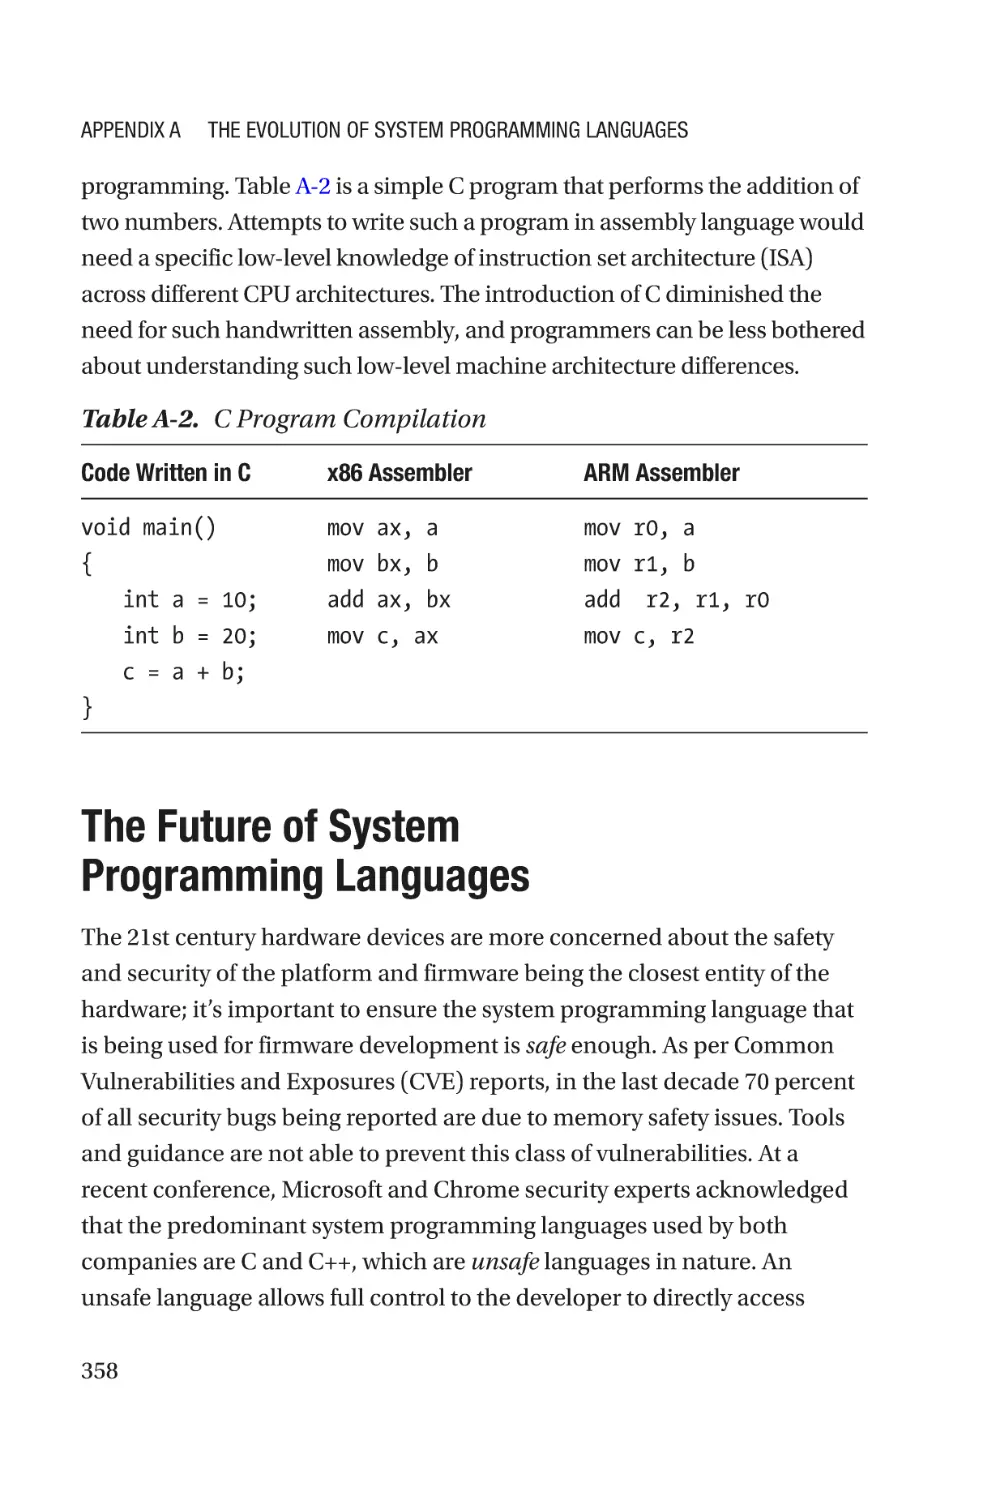 The Future of System Programming Languages